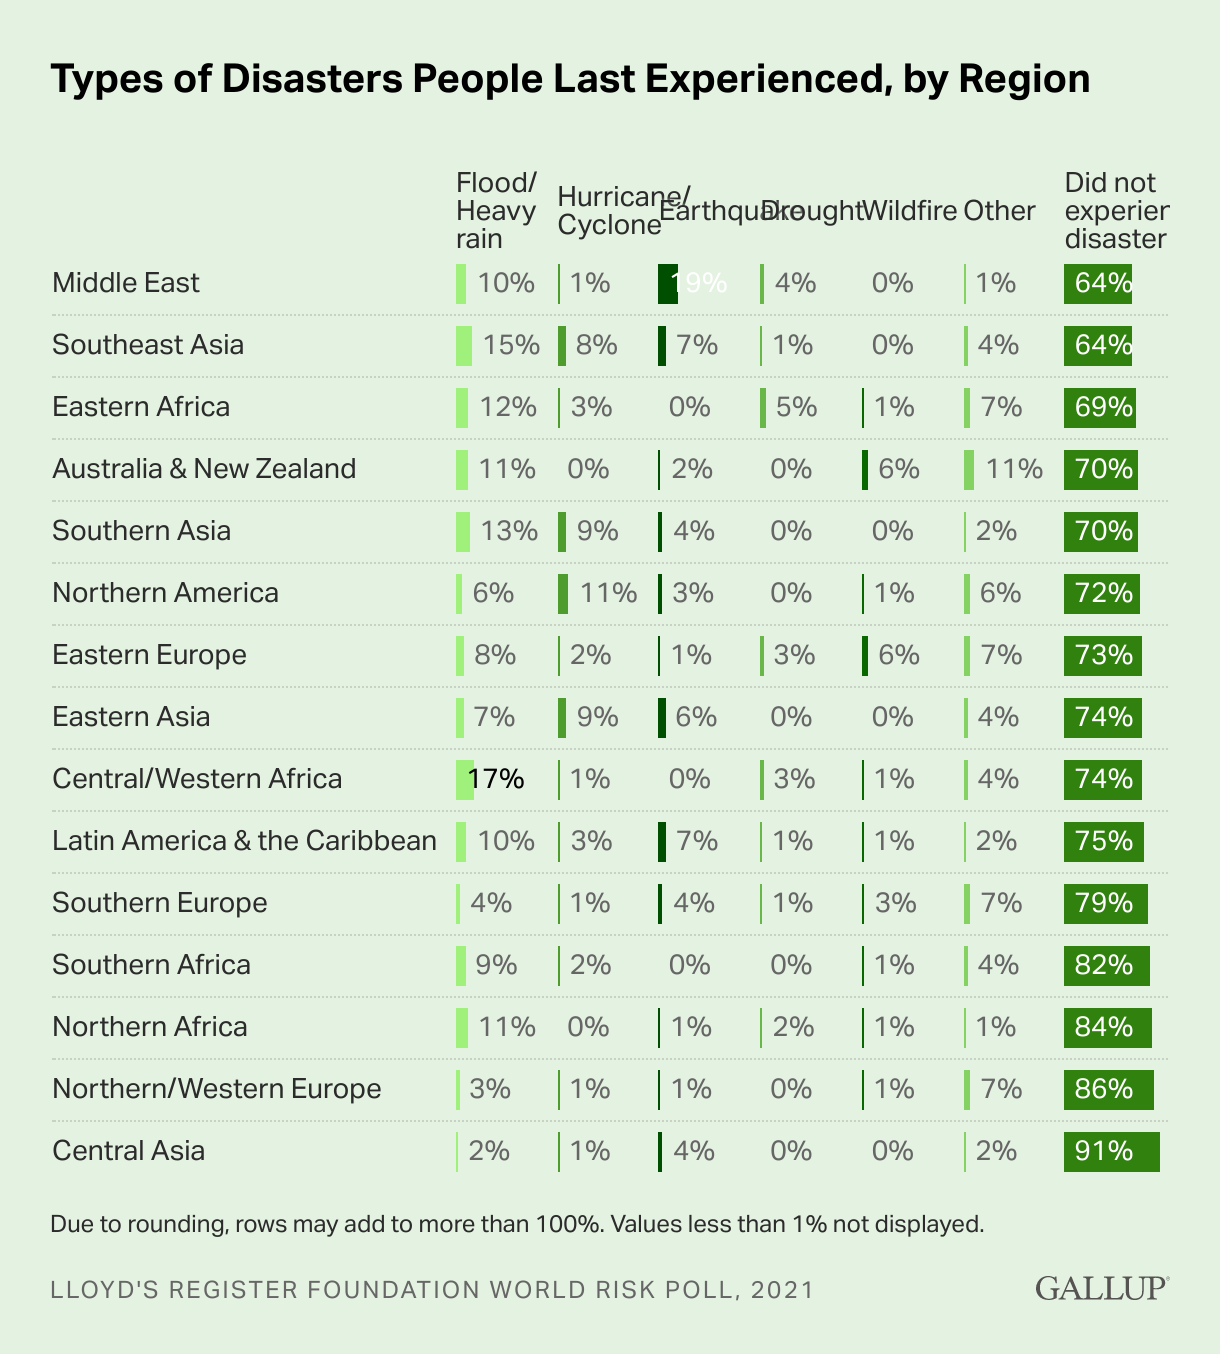 Experiences with disasters caused by natural hazards were most common in the Middle East and Southeast Asia.